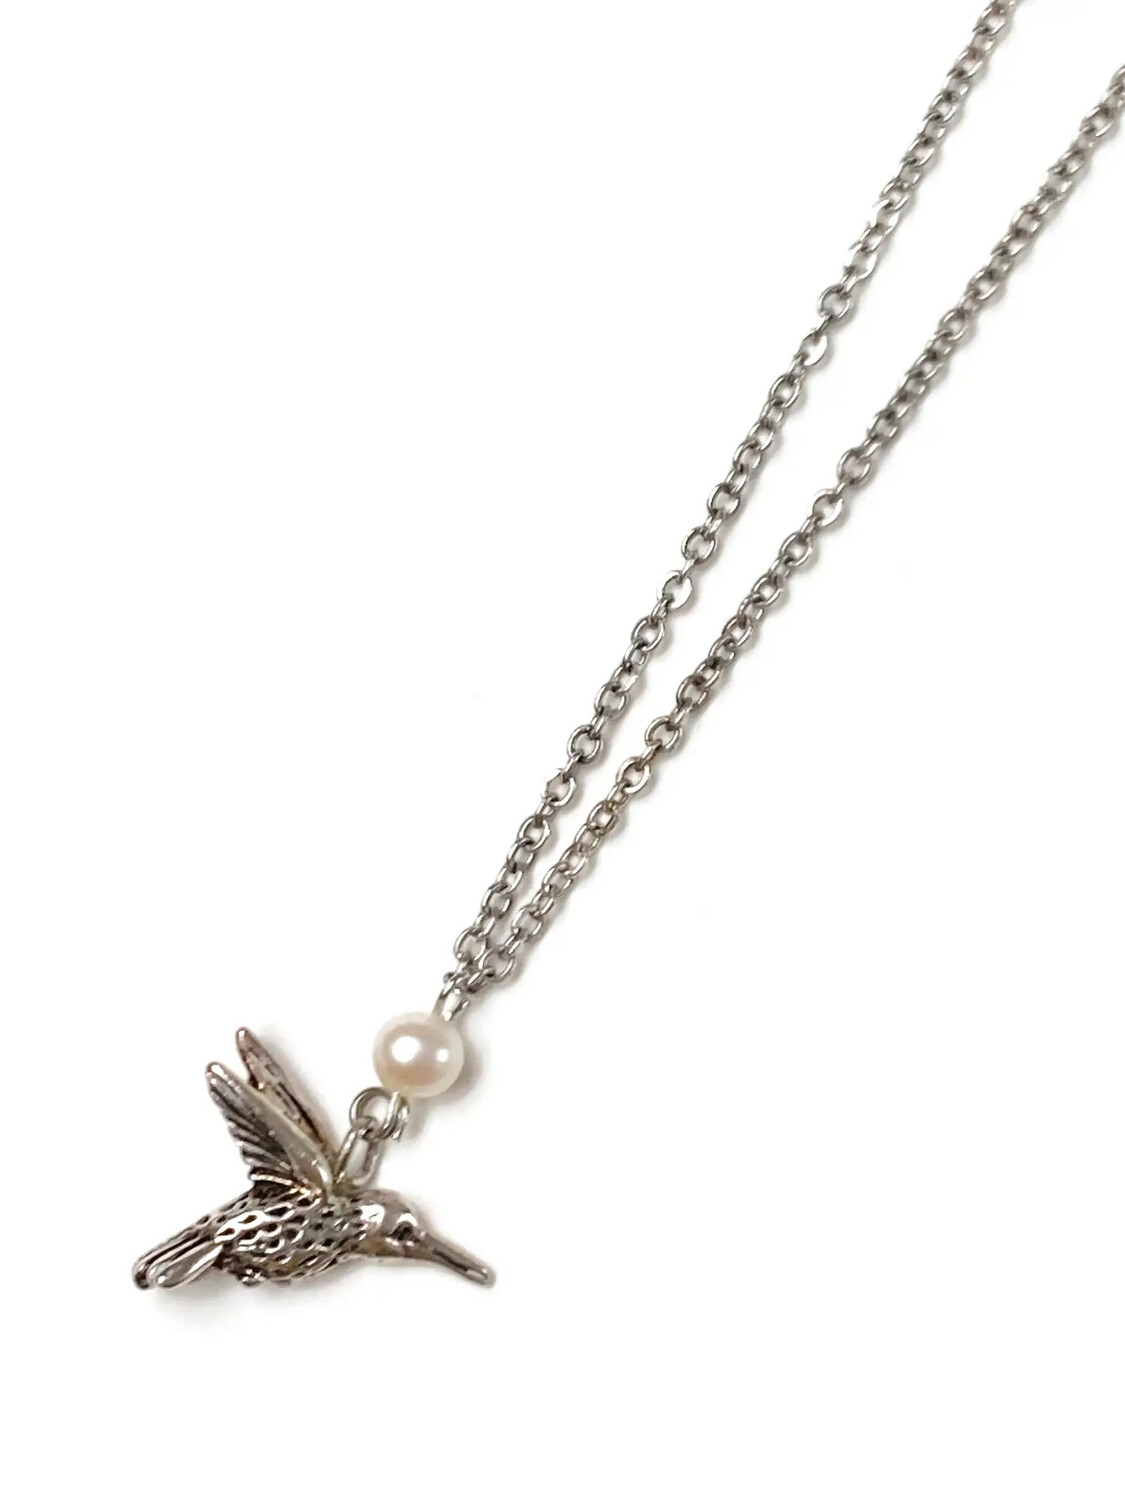 Antique Silver Hummingbird Freshwater Pearl Charm Necklace